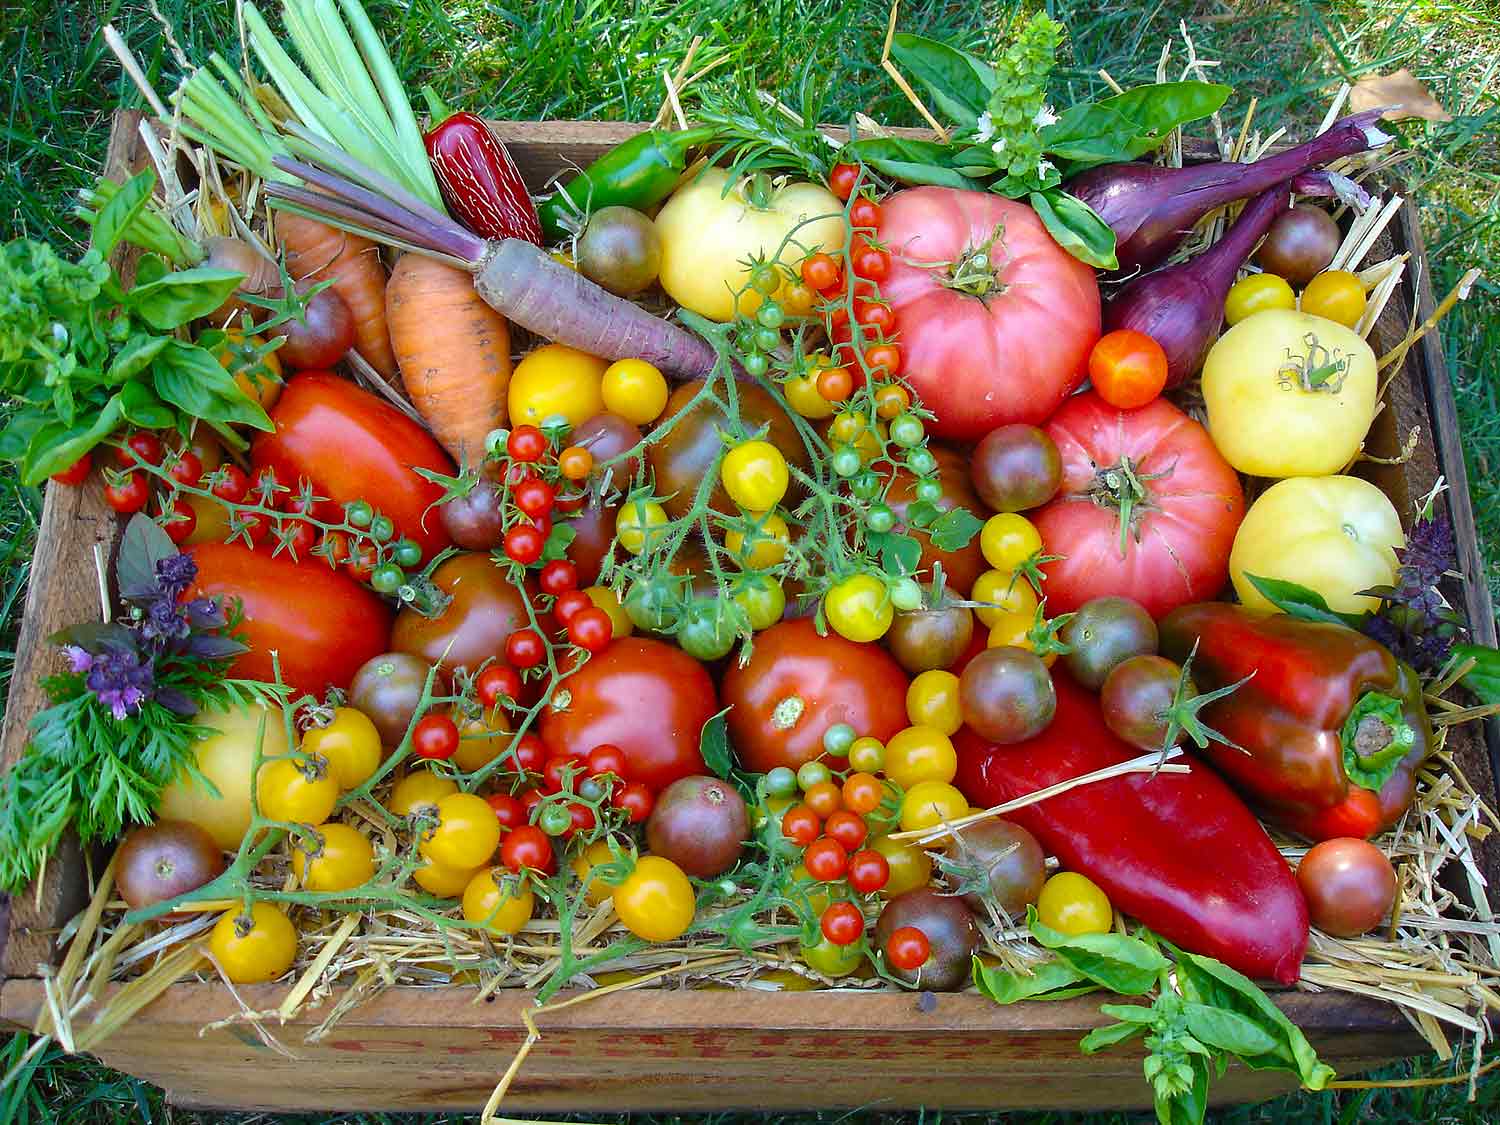 A wooden box filled with freshly harvested tomatoes, peppers, carrots, onions, and herb.